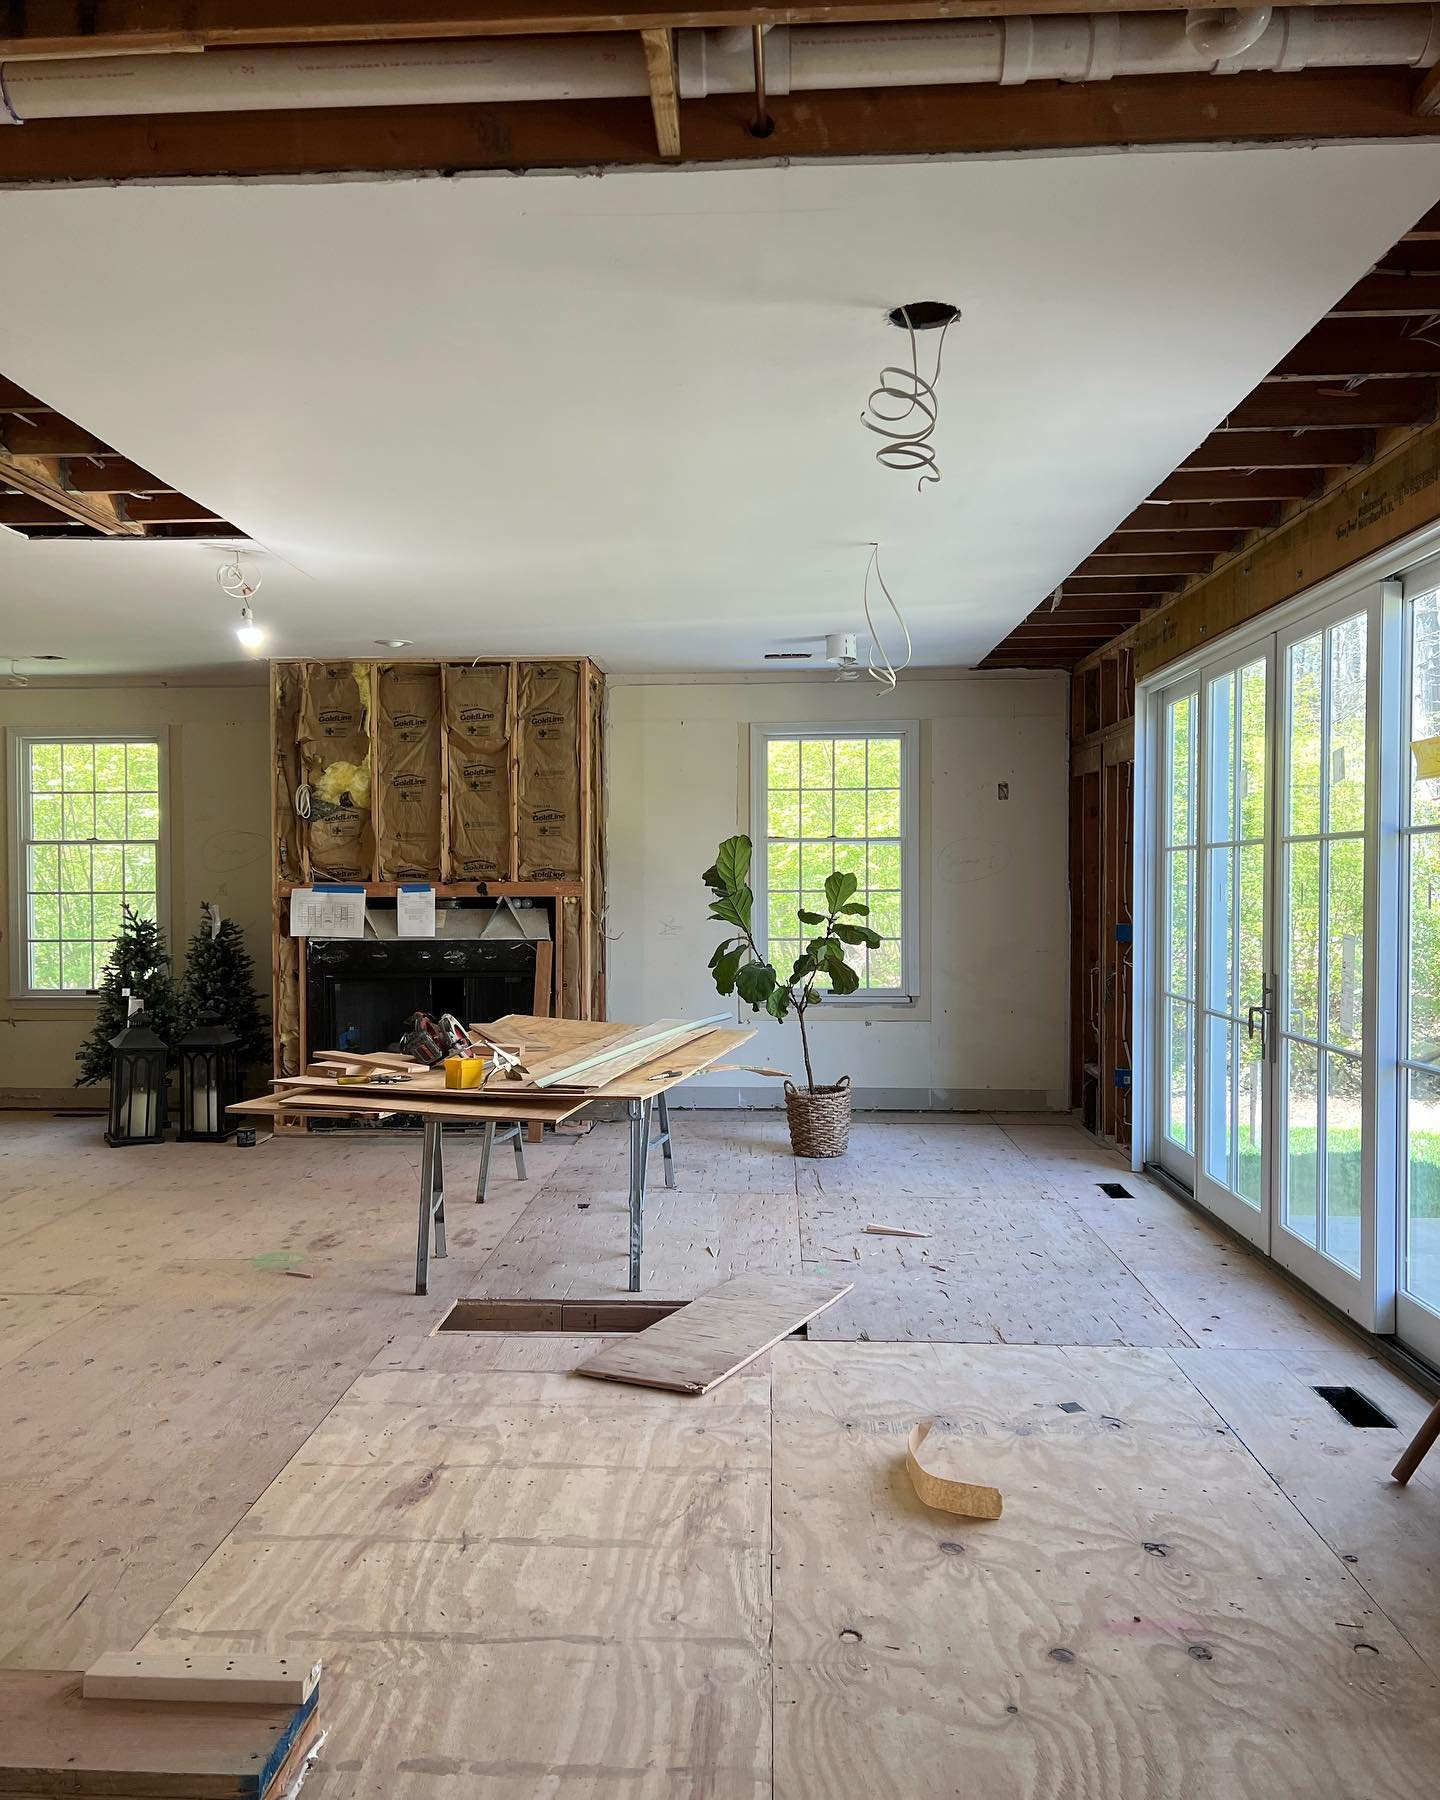 ALL the potential!
I love a renovation project with an amazing team ready to get it right for our (beyond lovely) client.
I feel lucky to be part of something so special for them. Stay tuned :)
The power of home!
#renovation #renovations #home #homer